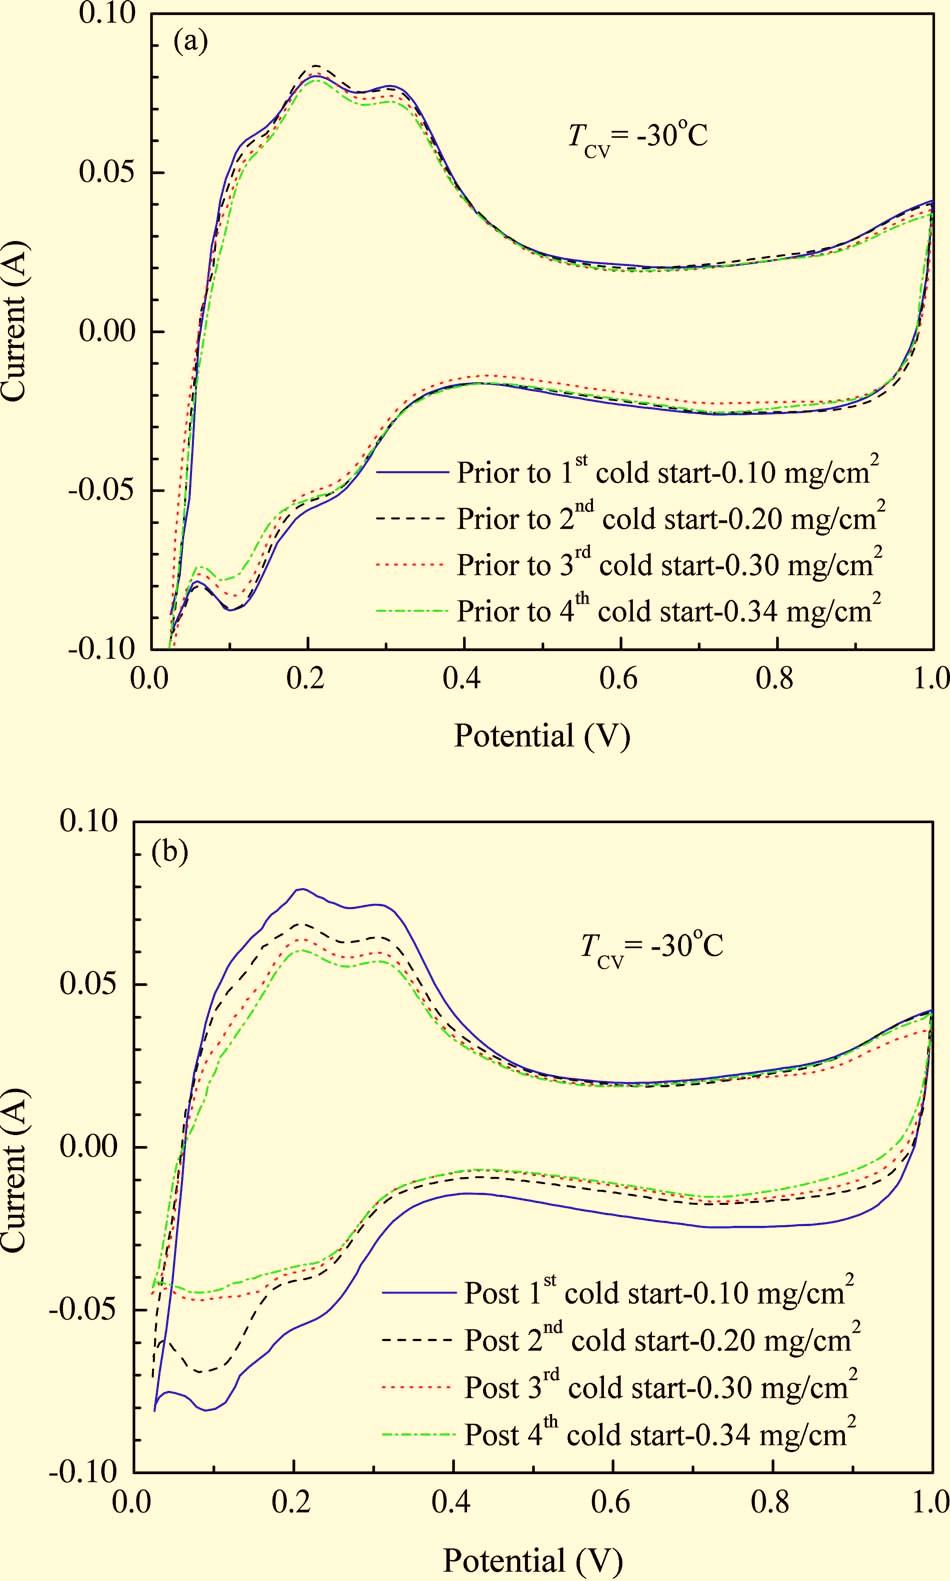 Journal of The Electrochemical Society, 154 12 B1399-B1406 2007 B1405 Figure 11. Color online Comparison of cell polarization curves in the cold start cycle from 30 C.